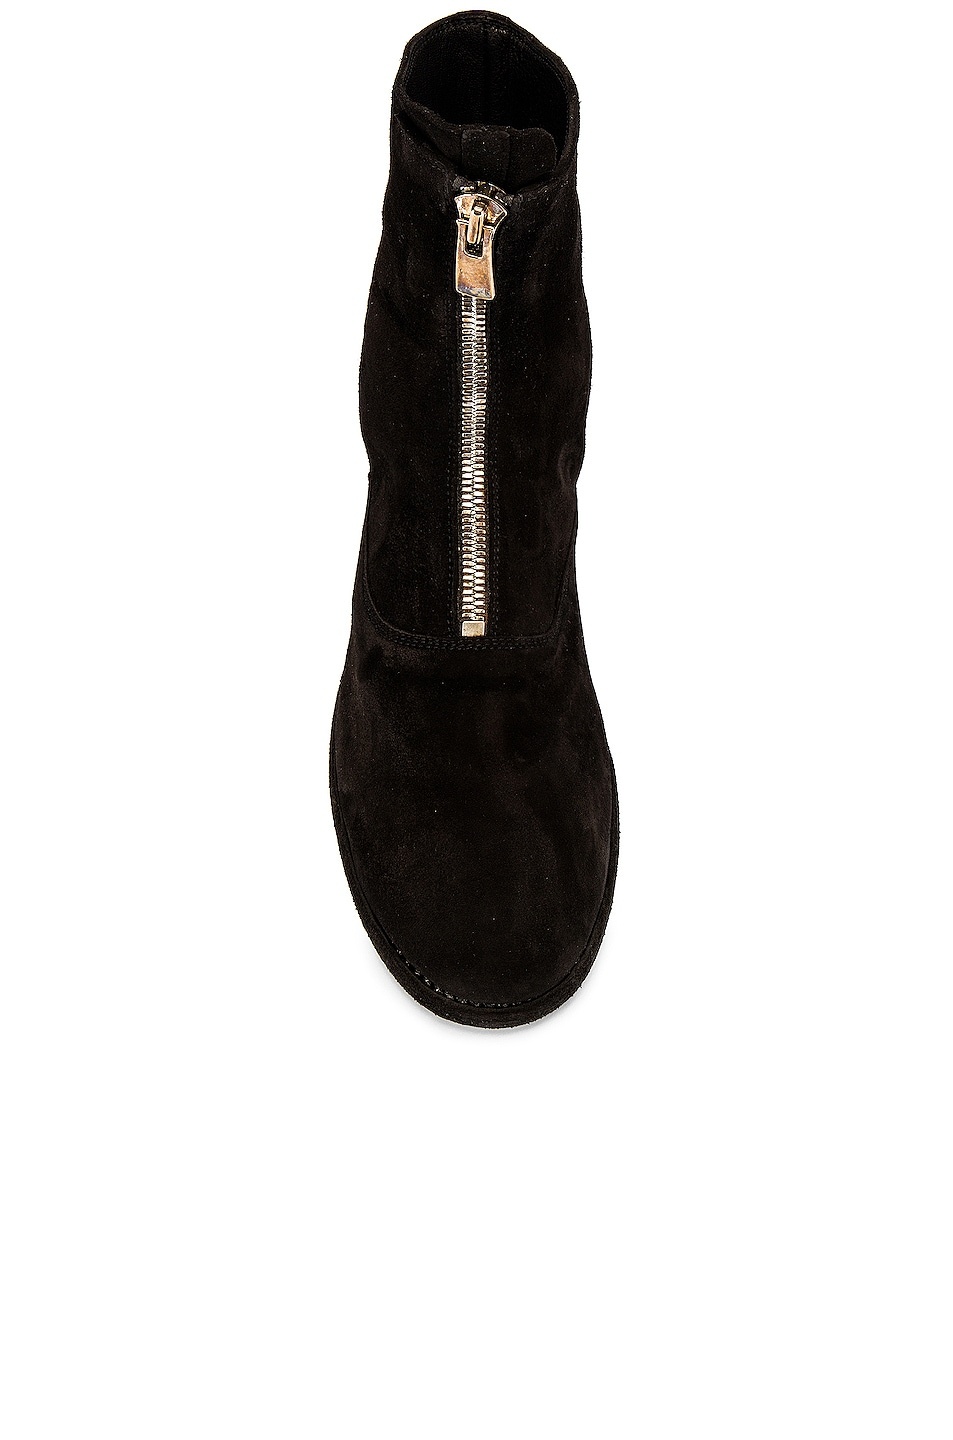 Stag Suede Zipper Boots - 4